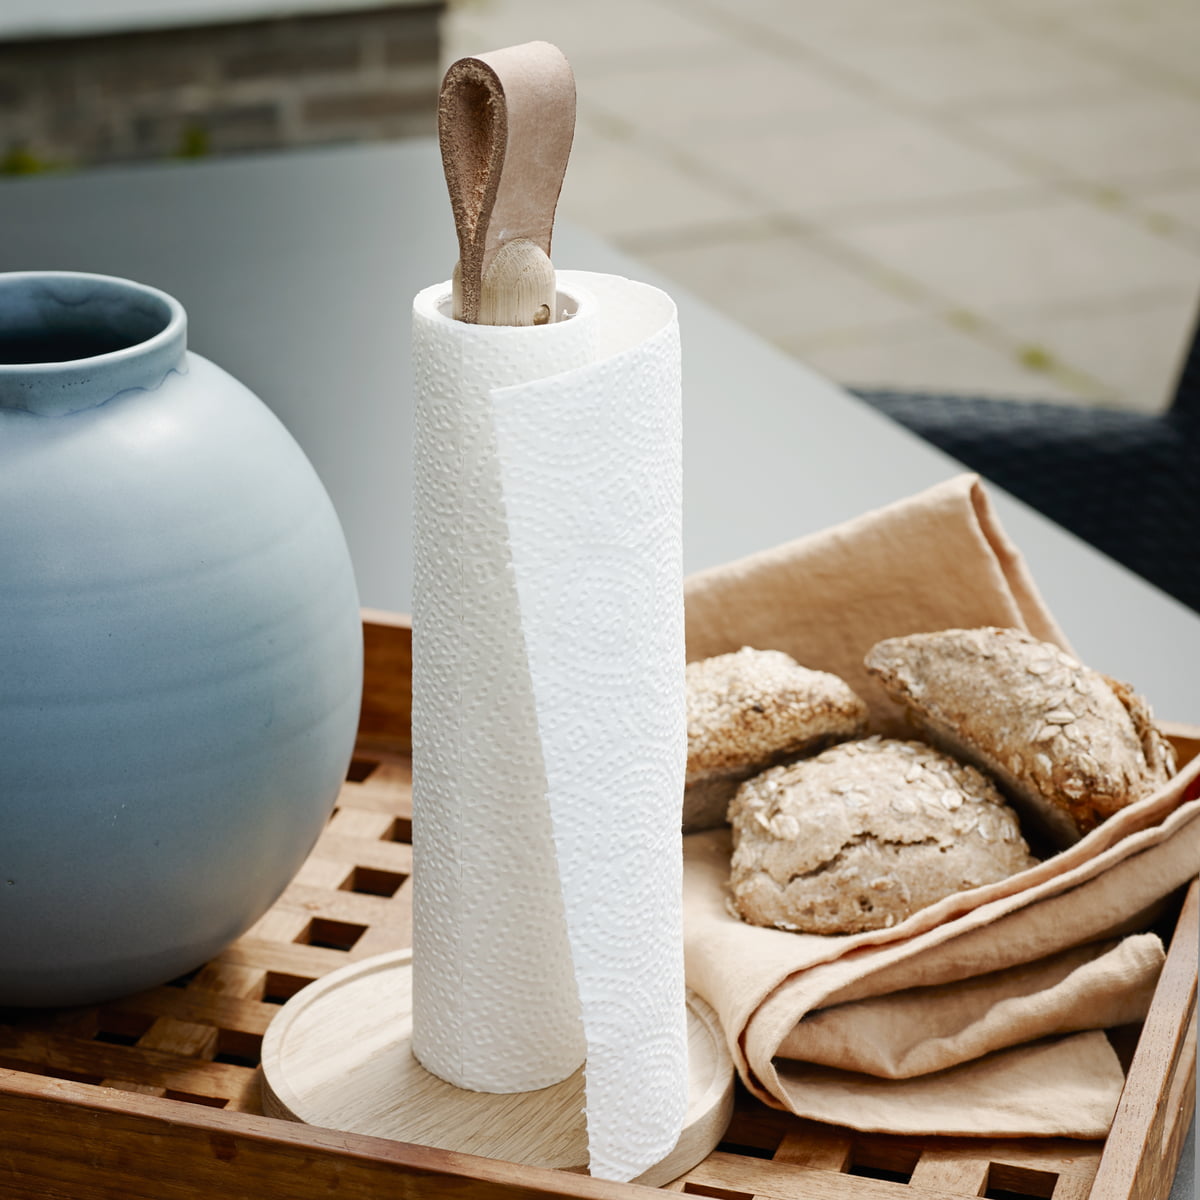 Paper towel holder from leather, wood / Kitchen roll holder